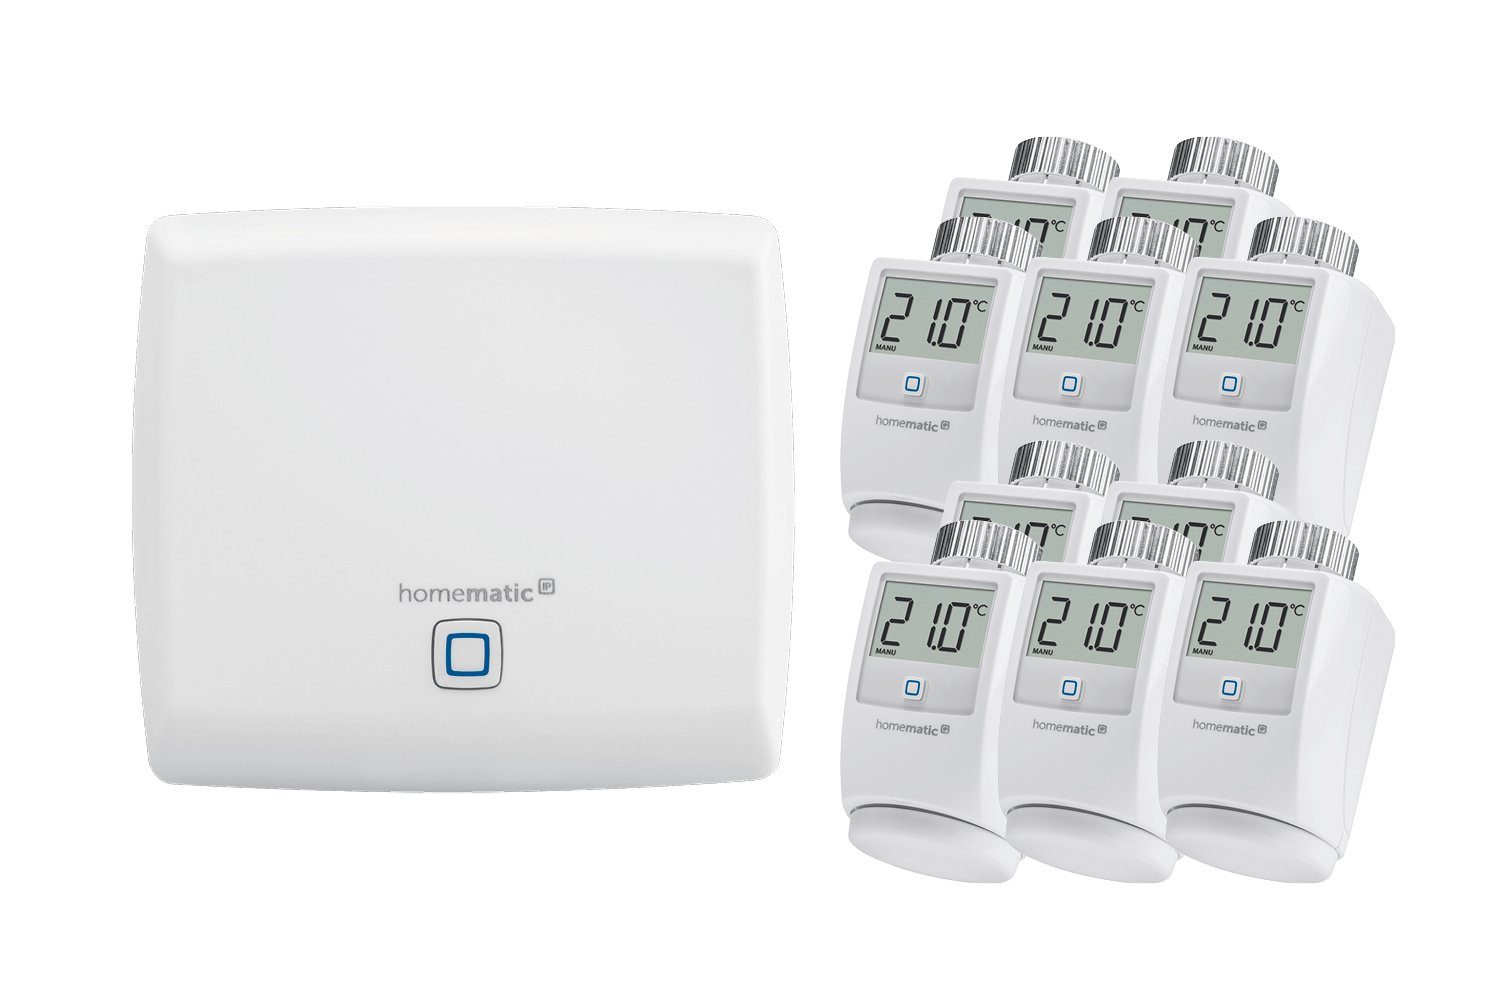 Heizkörperthermostat IP heizkörperthermostat SET: 10St. Access Point + Homematic